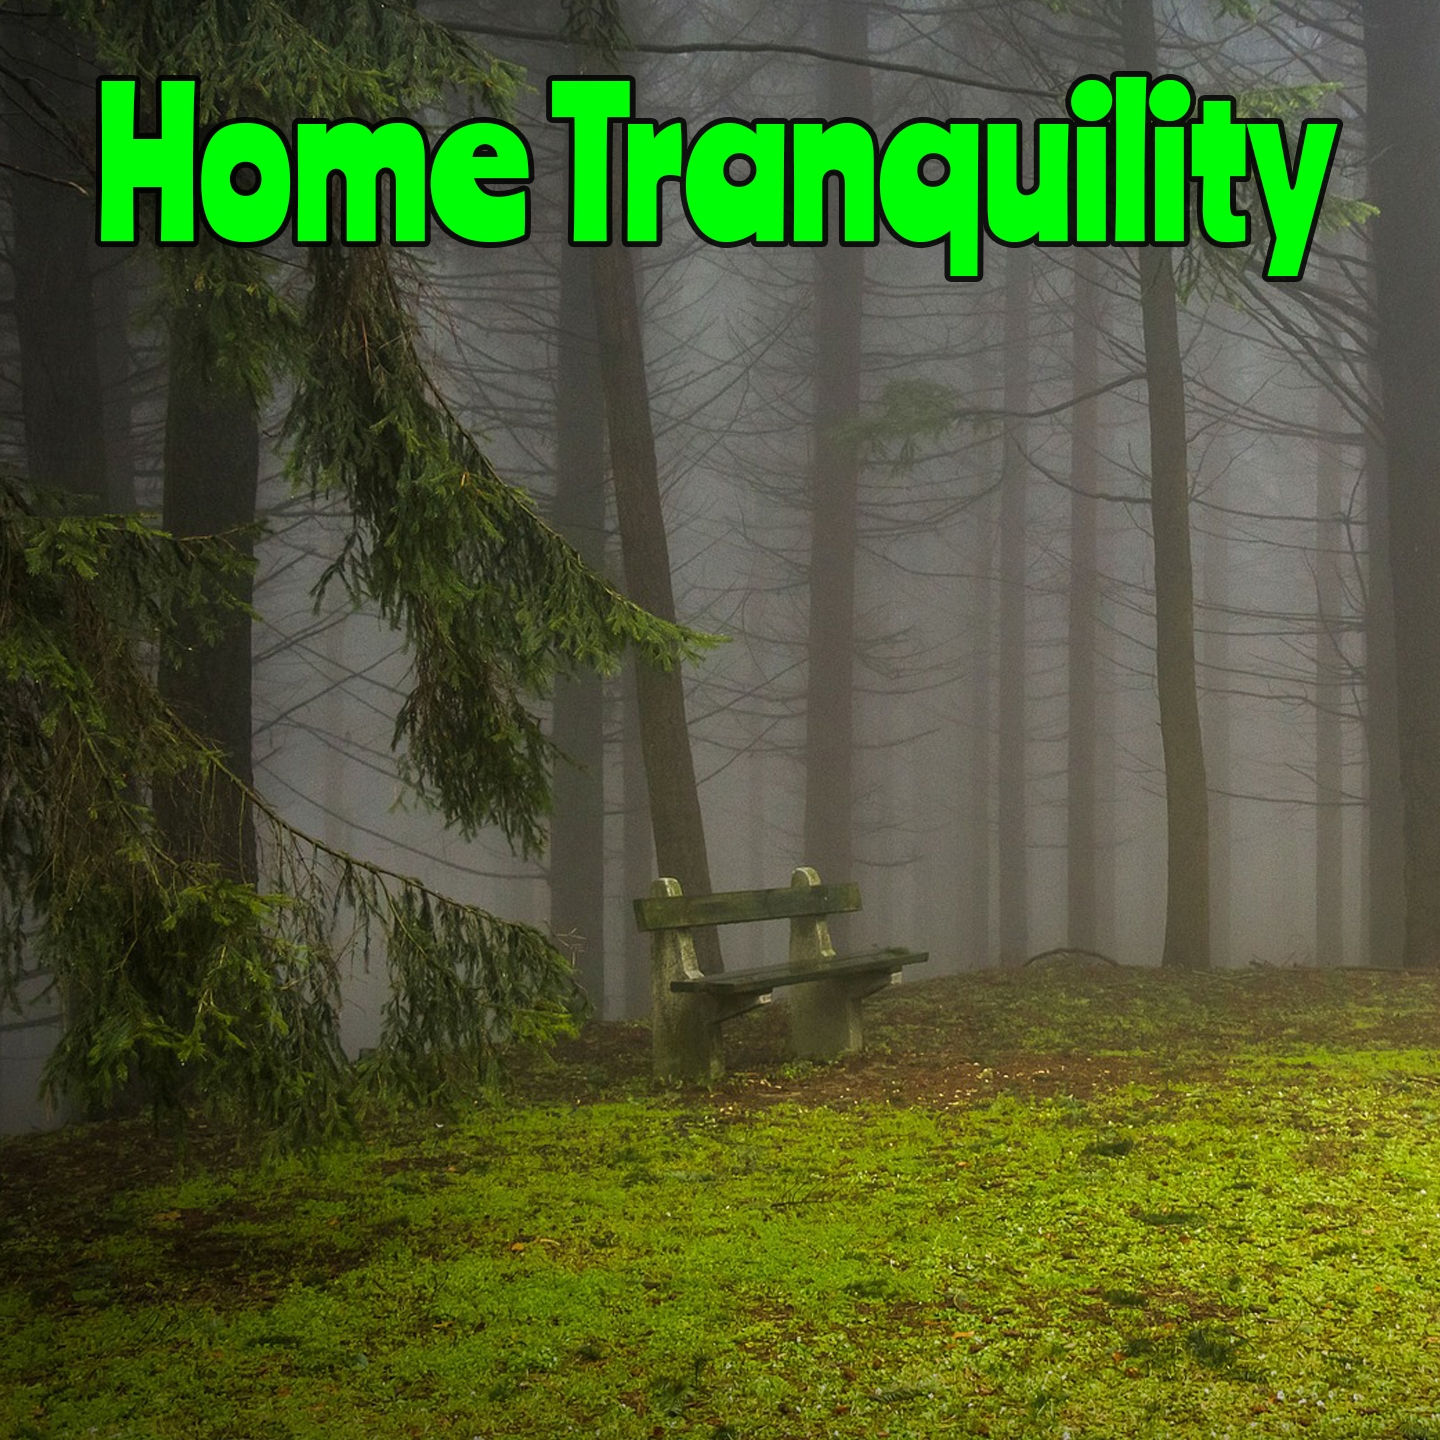 Home Tranquility